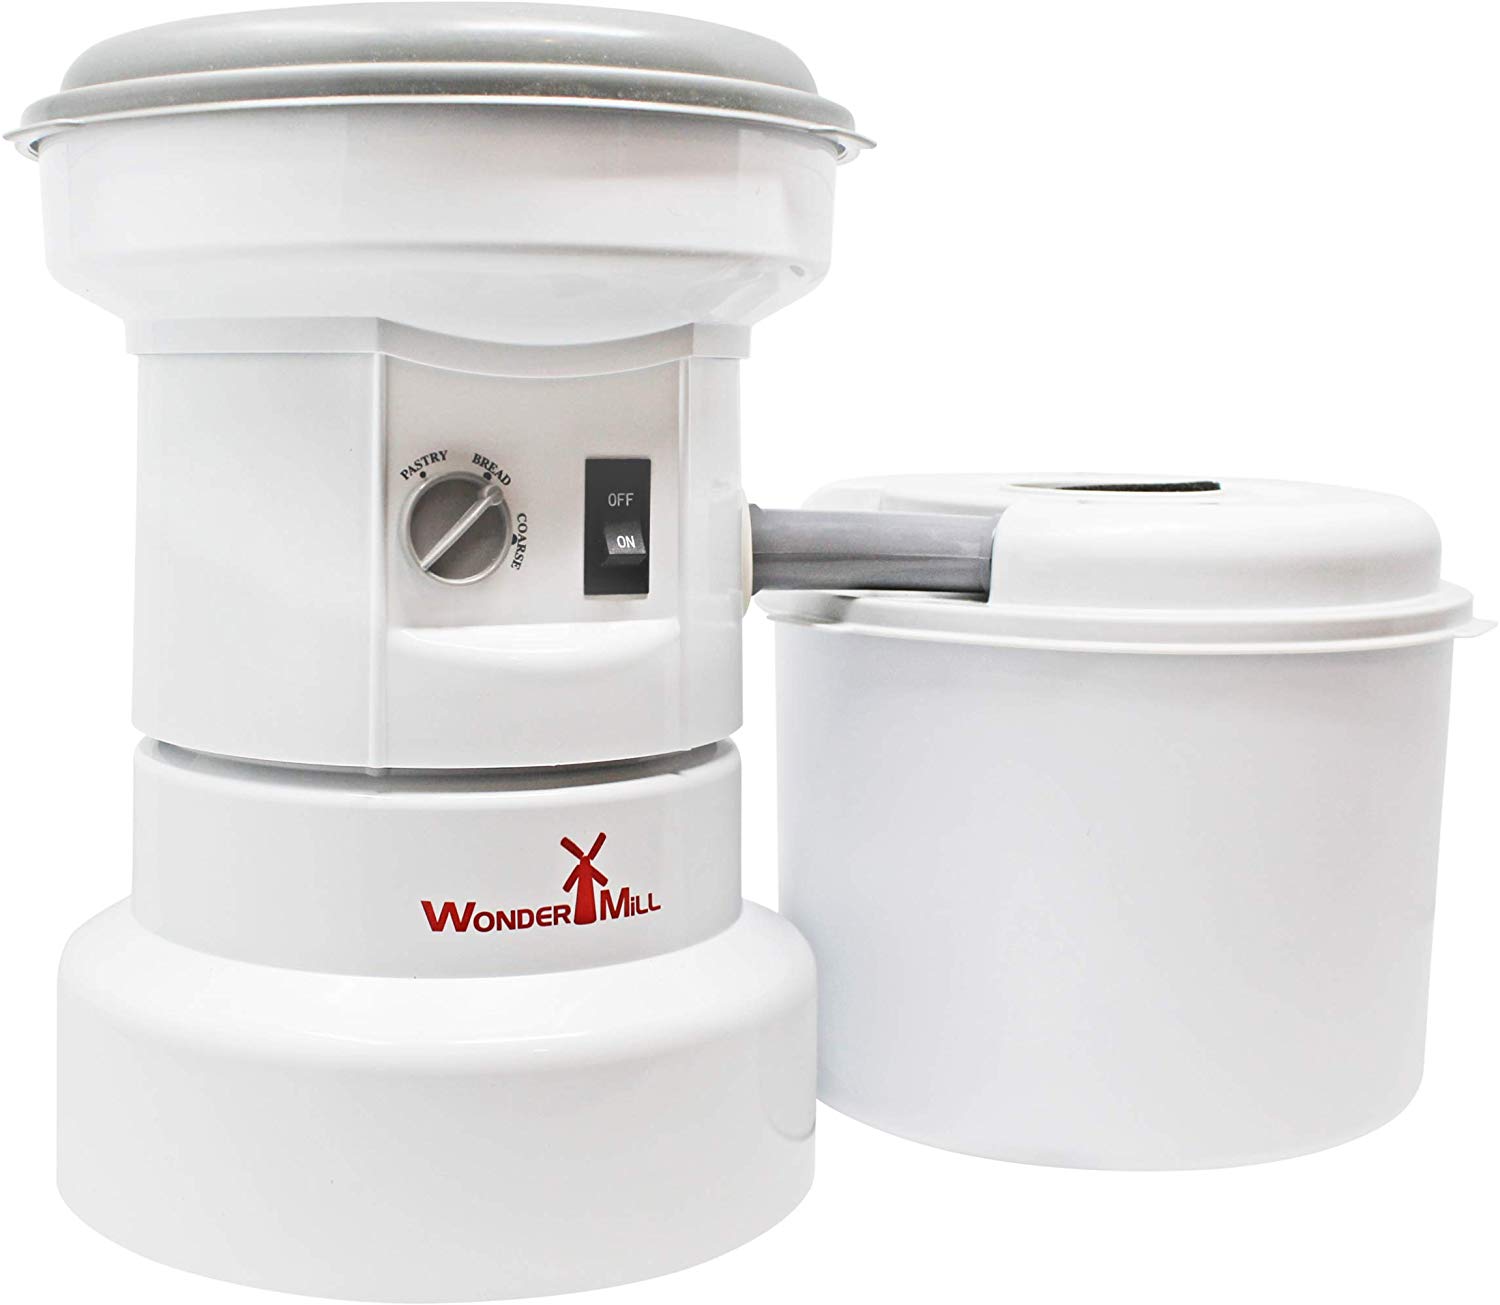 Powerful Electric Grain Mill Grinder for Home and Professional Use by Wondermill